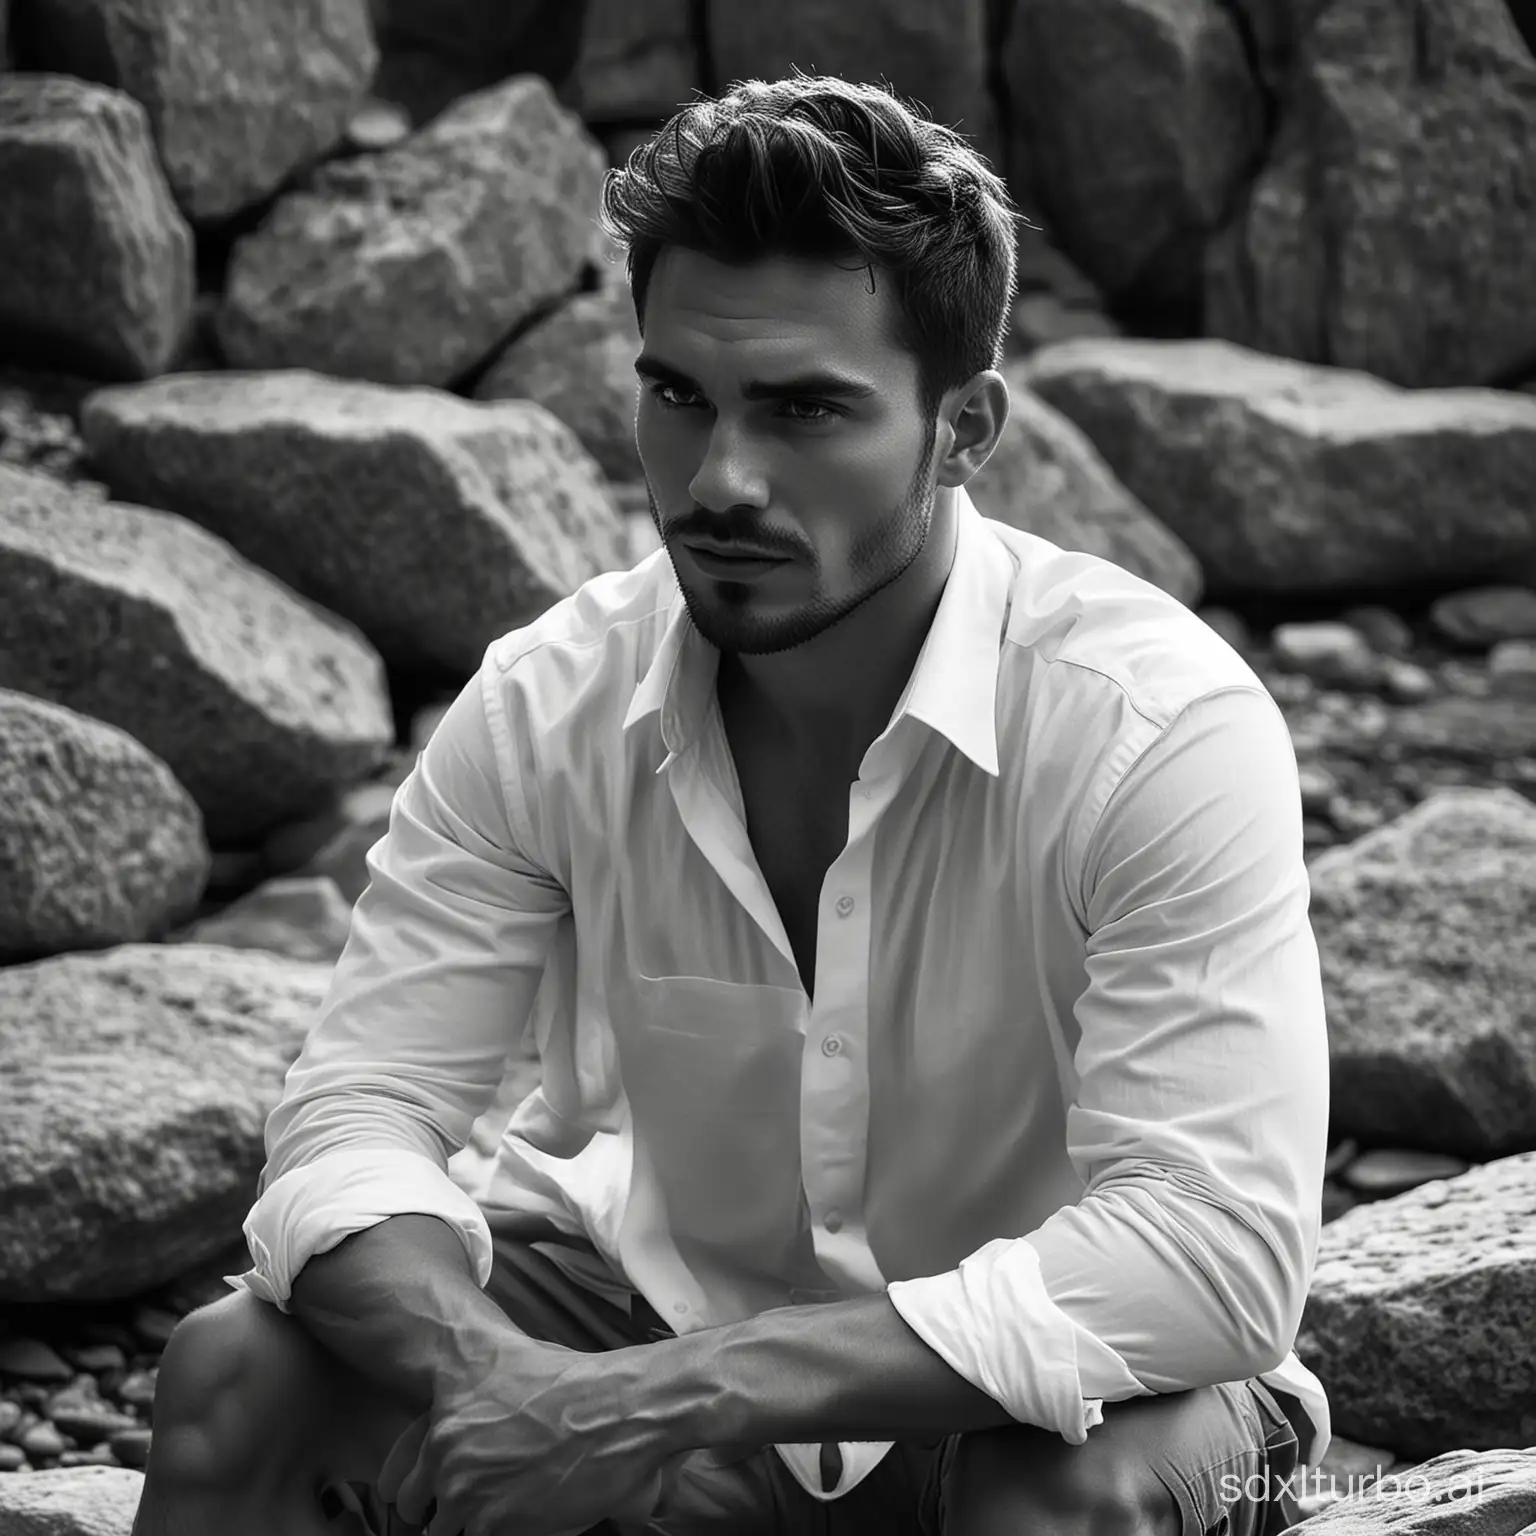 Handsome-Man-in-White-Shirt-Sitting-on-Stones-in-Cinematic-Black-and-White-Gym-Palace-Scene